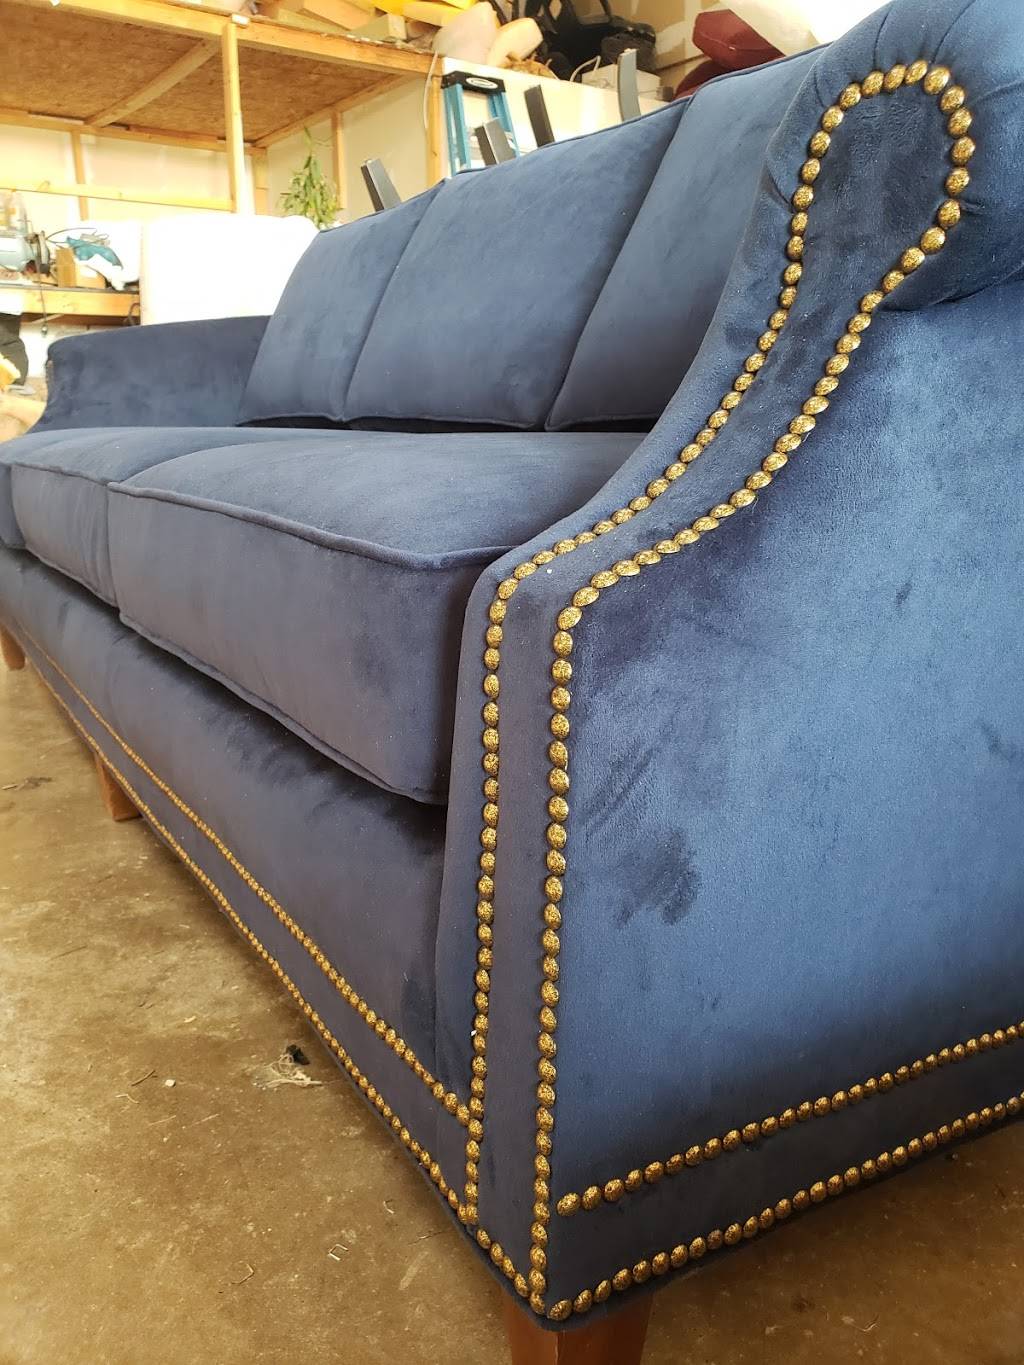 Max’s Upholstery | 10944 Grissom Ln #704, Dallas, TX 75229, USA | Phone: (214) 952-6536